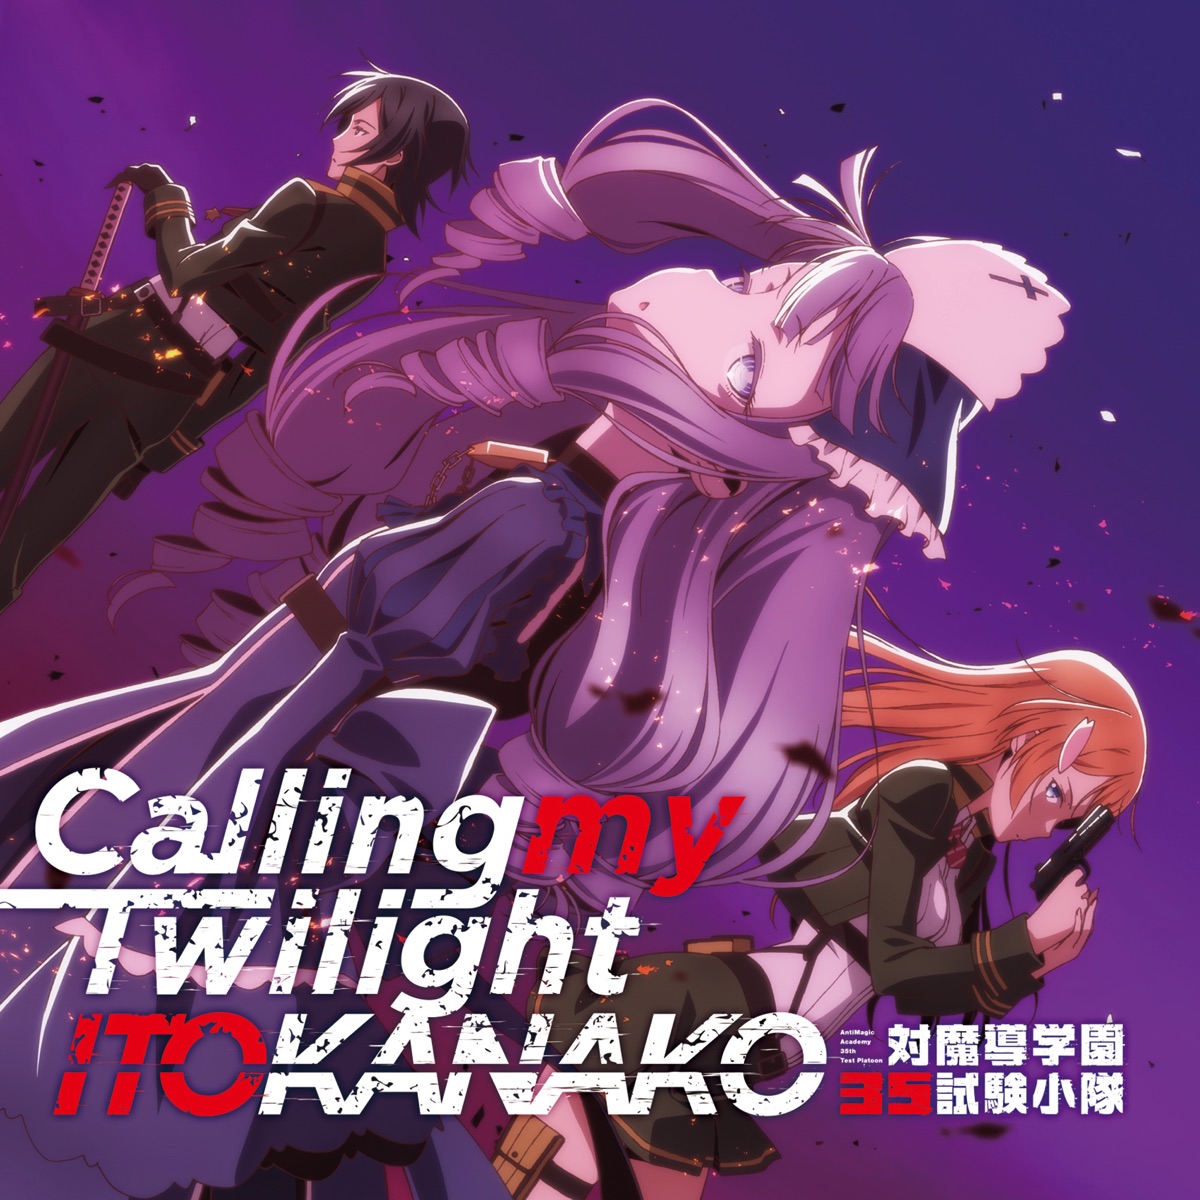 Cover art for『Kanako Ito - Calling my Twilight』from the release『Calling my Twilight